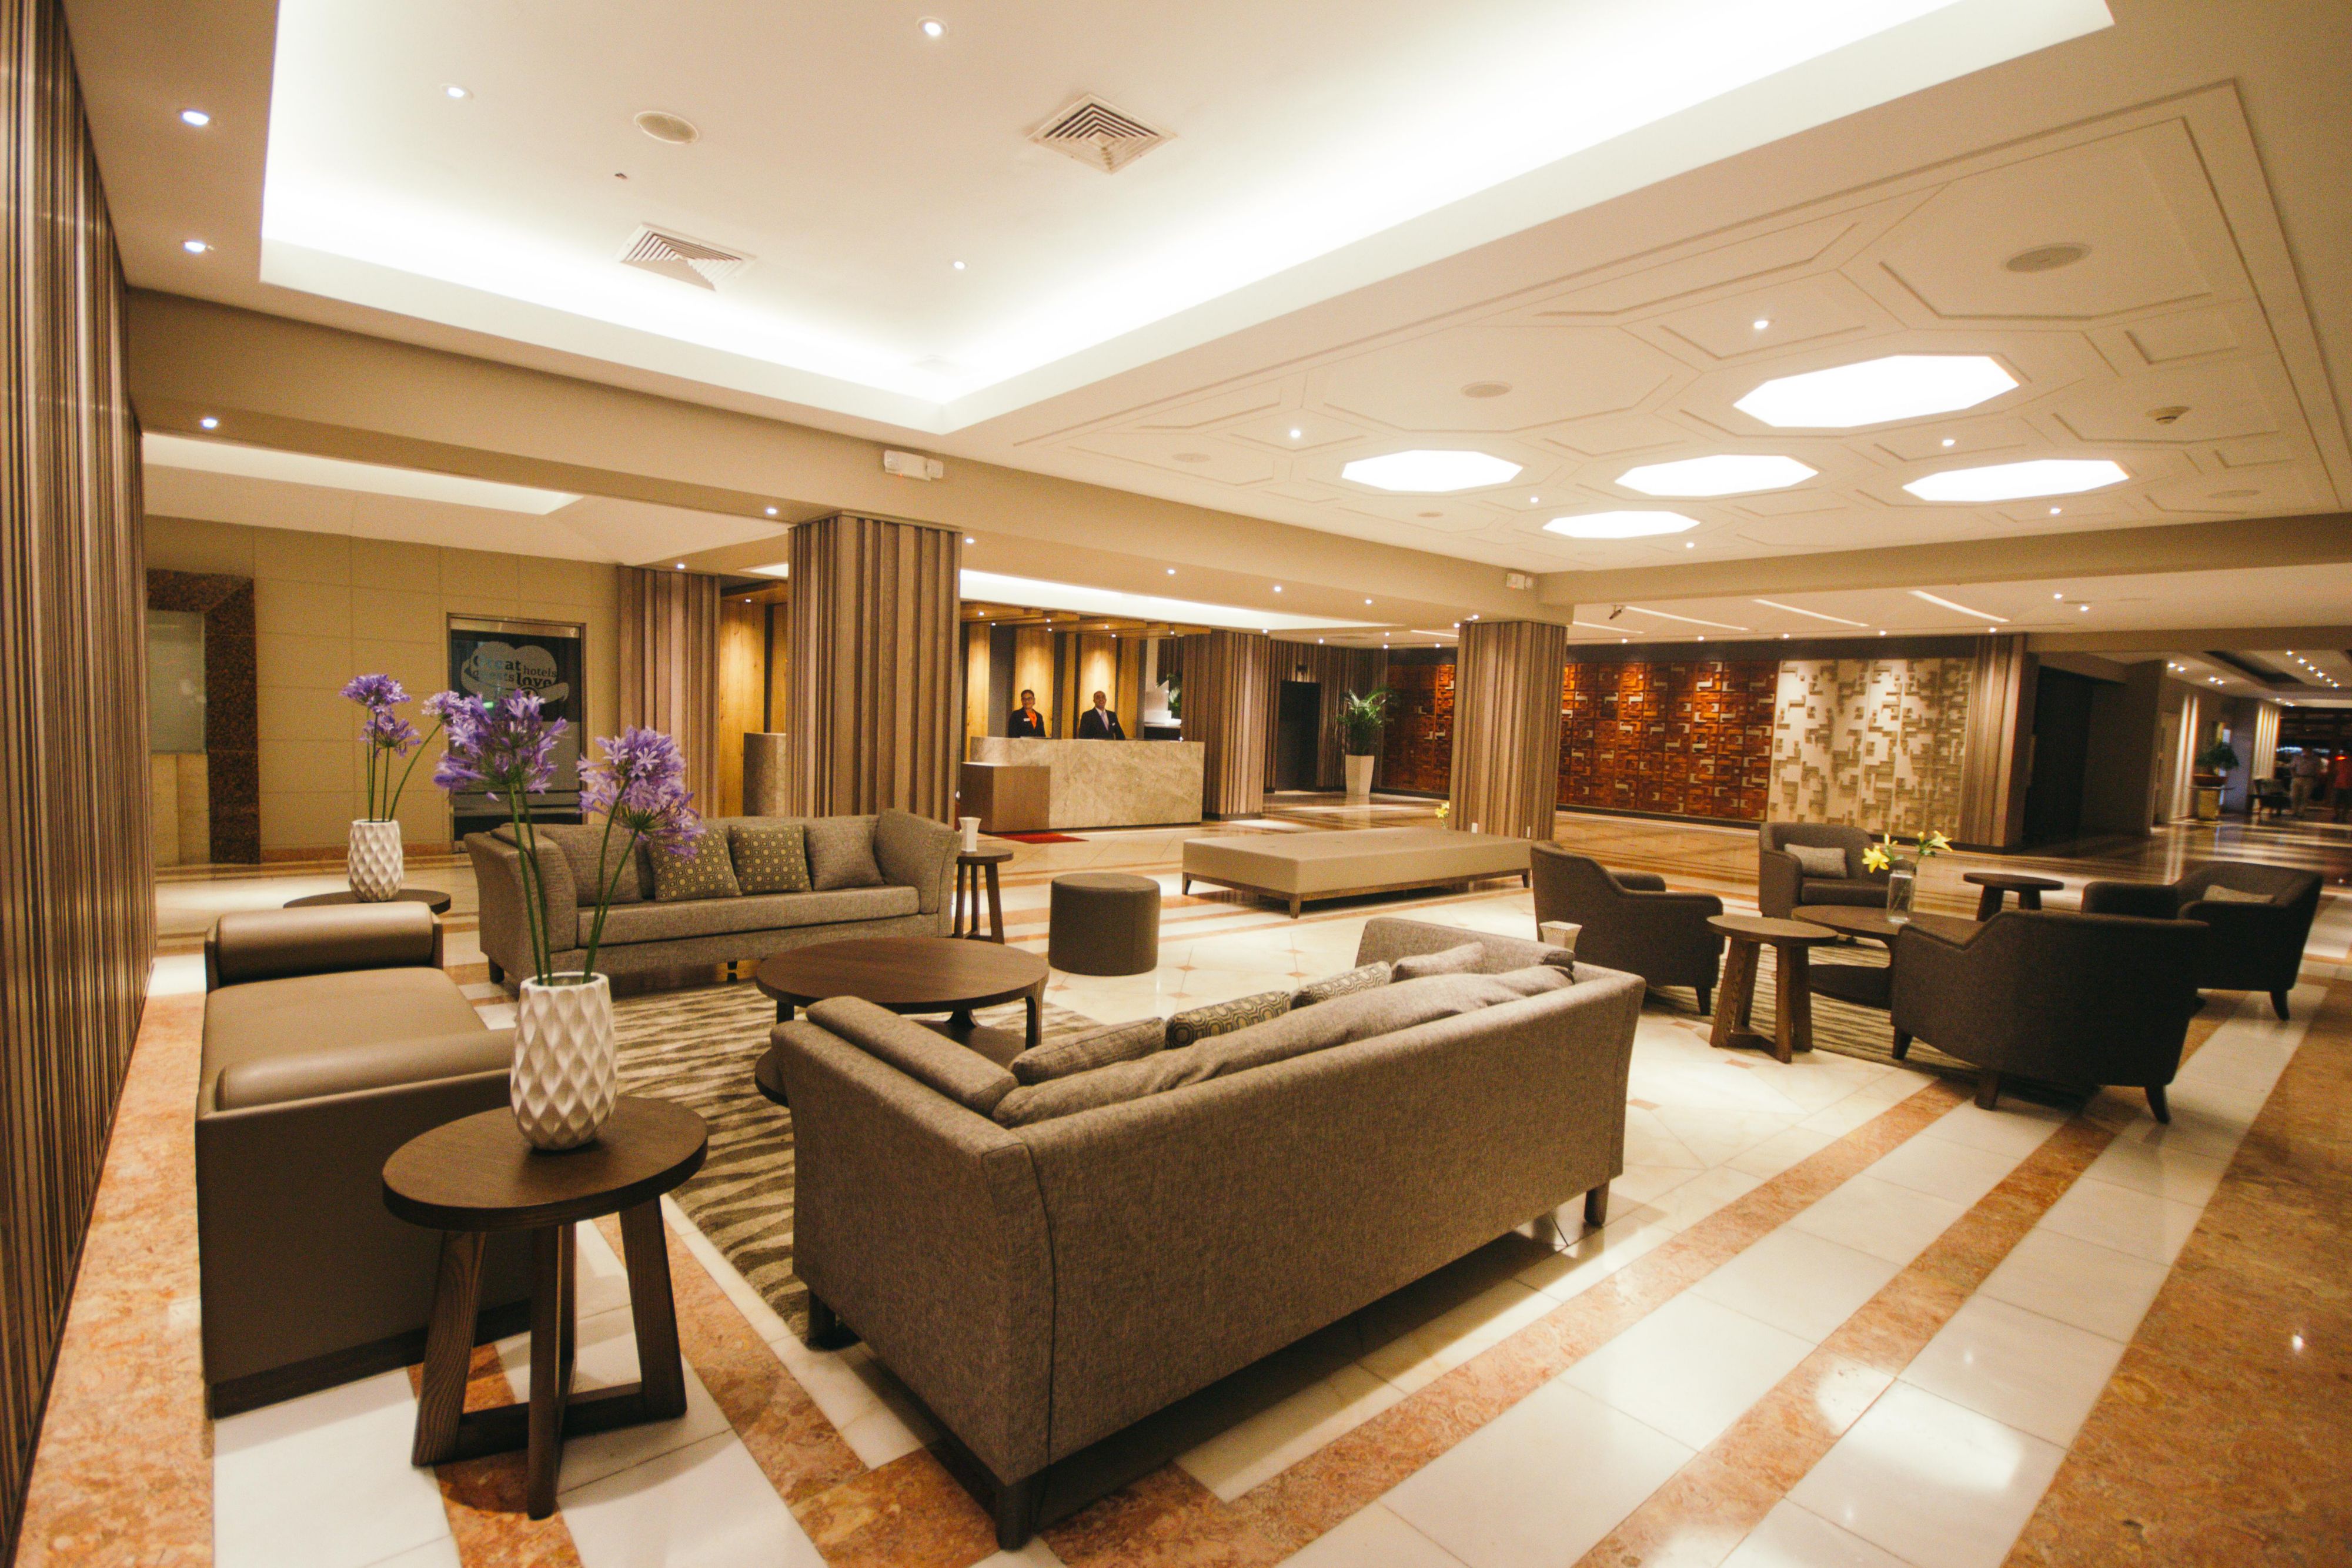 Modern, elegant and confortable, that describes our new lobby.